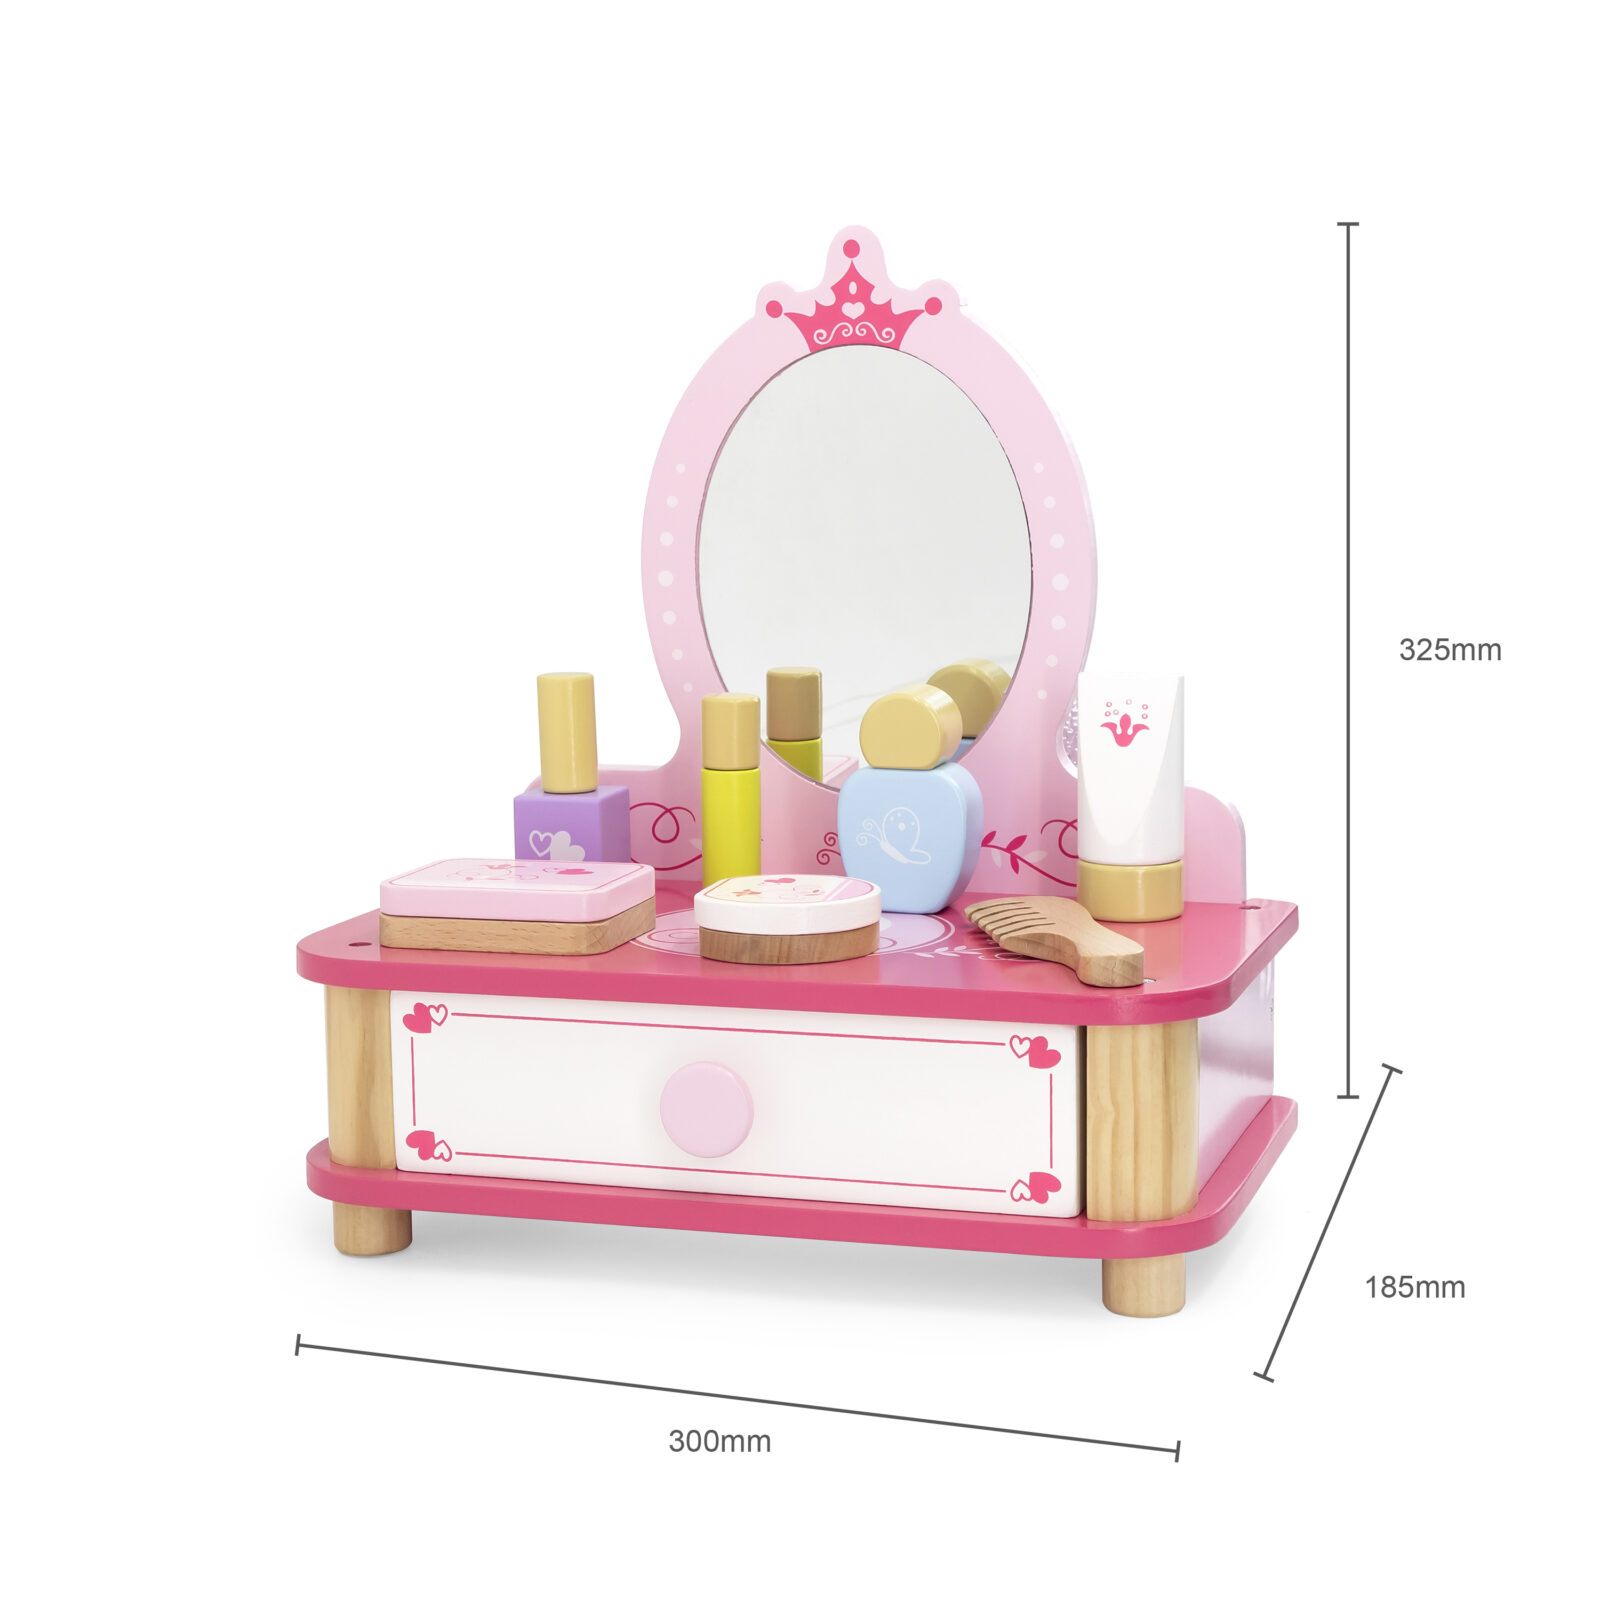 dressing table dimensions